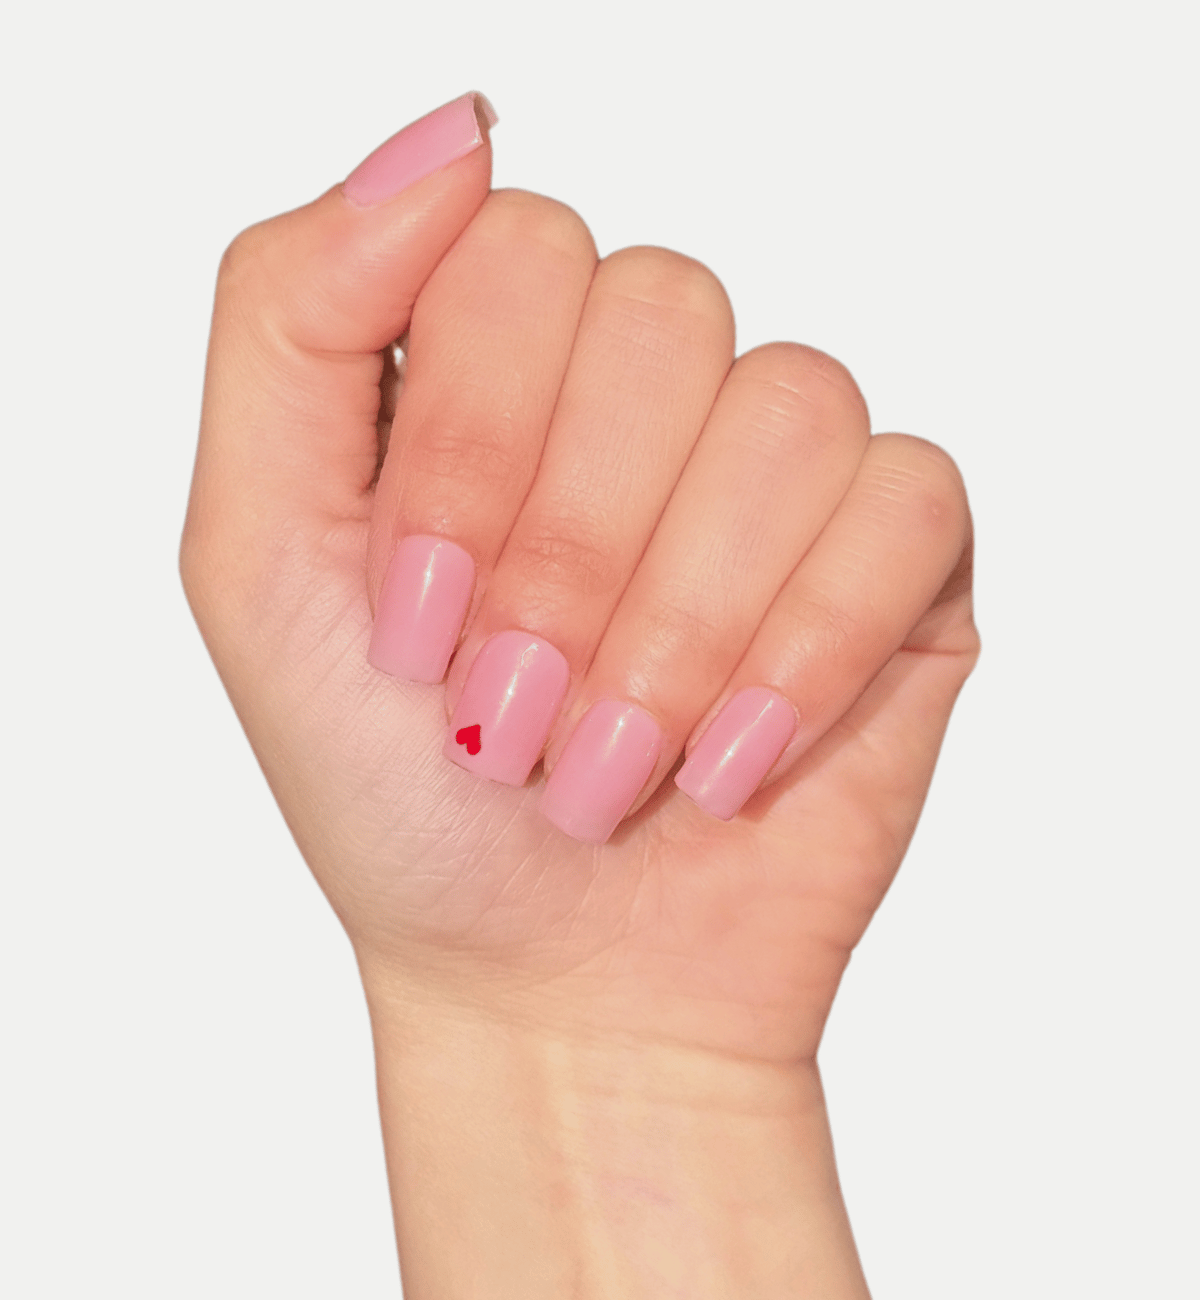 FAUX ONGLES ROSE NUDE ST-VALENTIN CARRÉ COURT